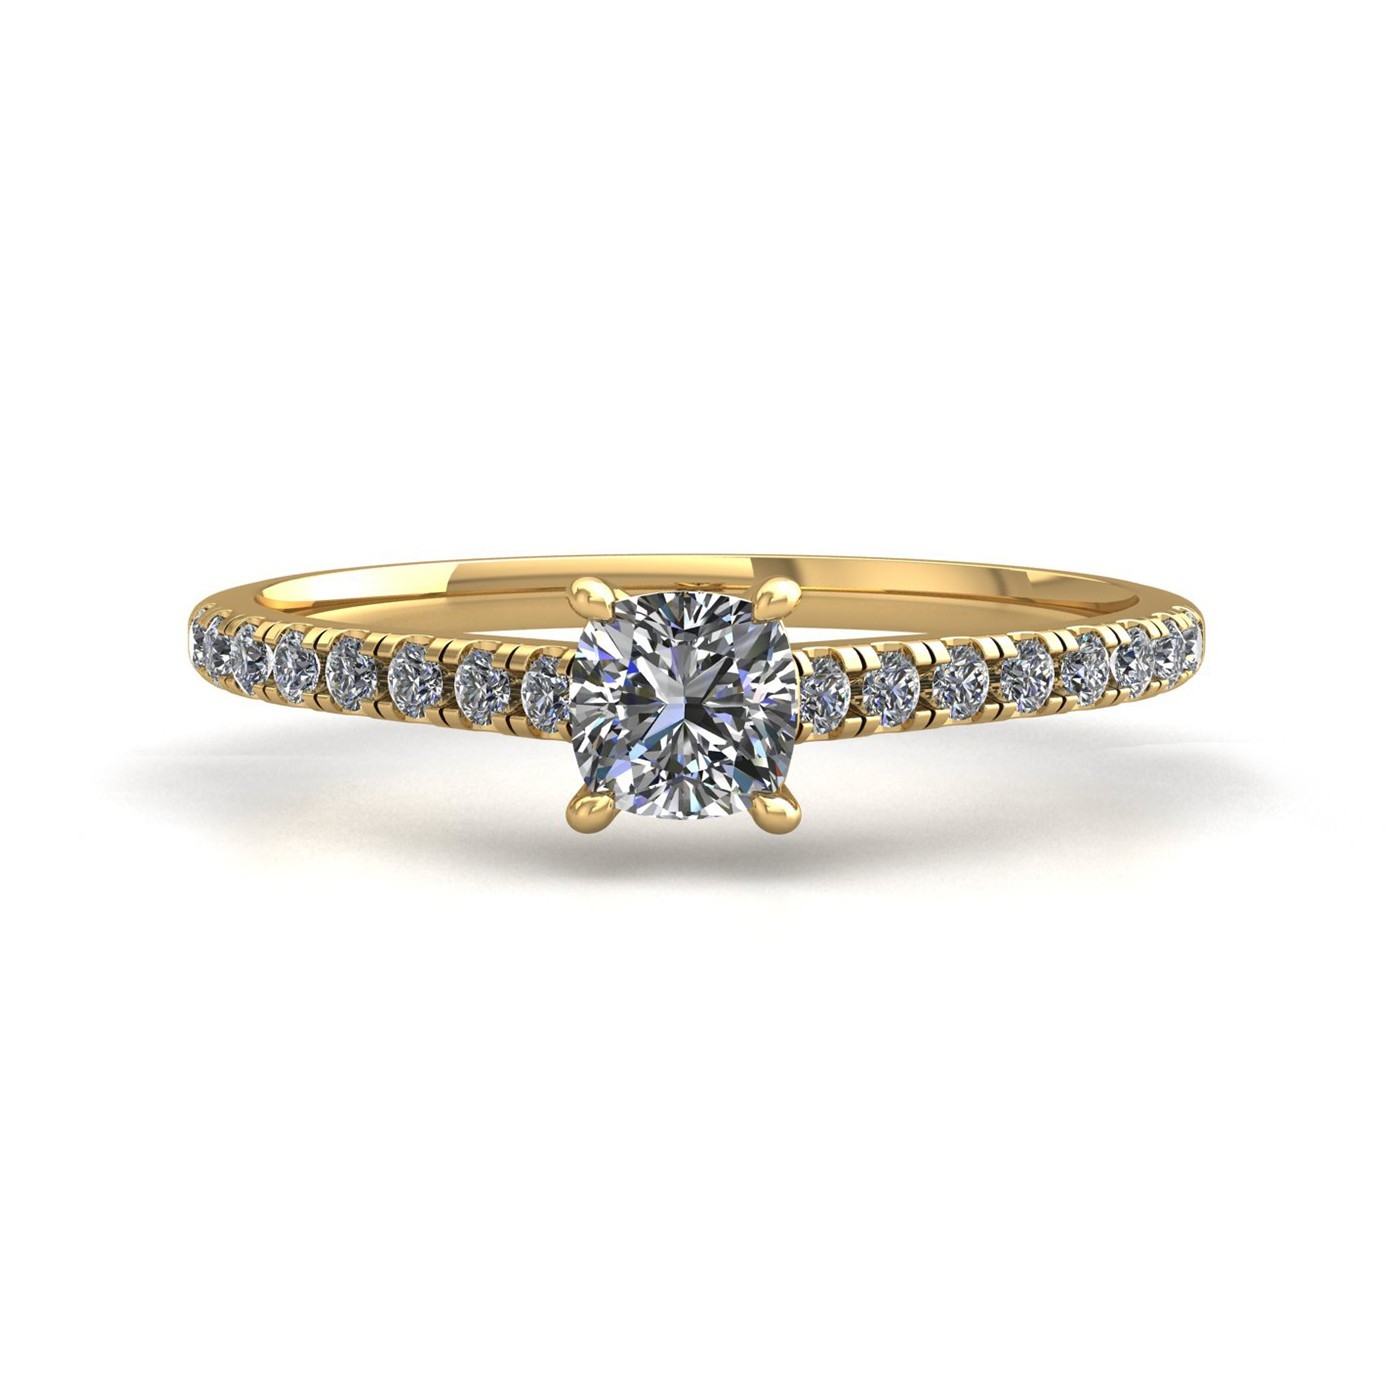 18k yellow gold 1.5ct 4 prongs cushion cut diamond engagement ring with whisper thin pavÉ set band Photos & images